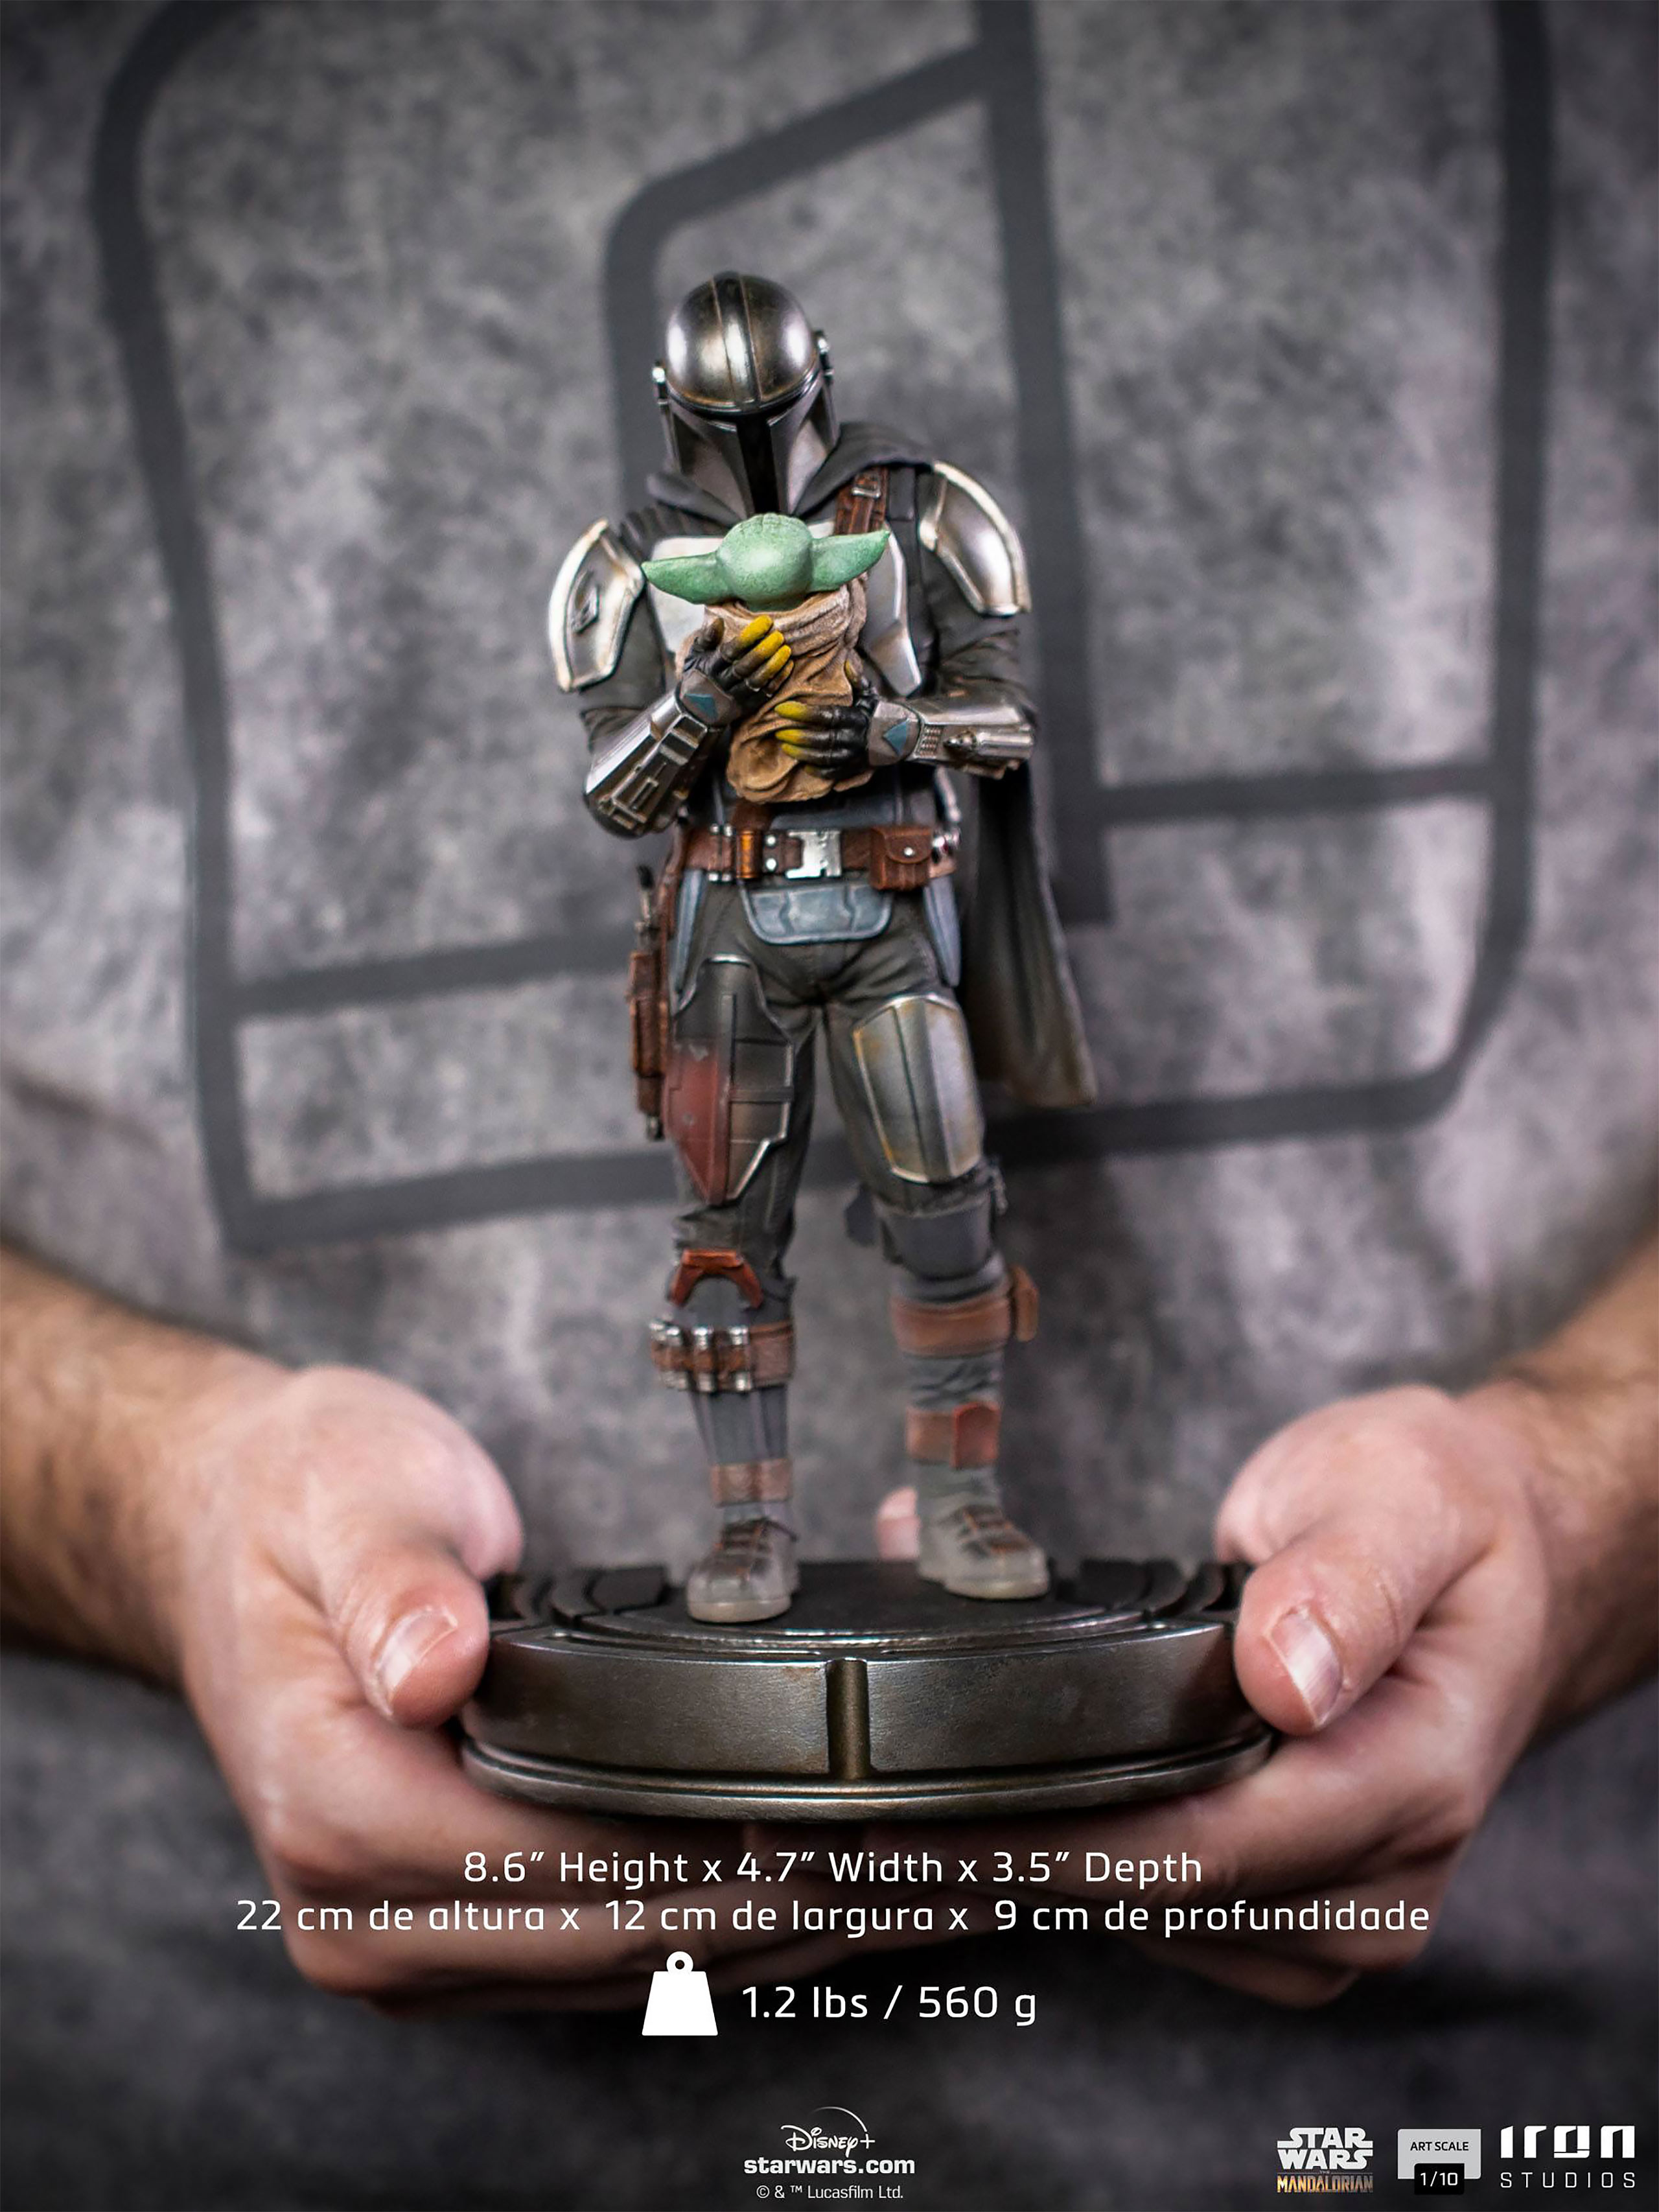 Mando with Grogu BDS Art Scale Deluxe Statue - Star Wars The Mandalorian